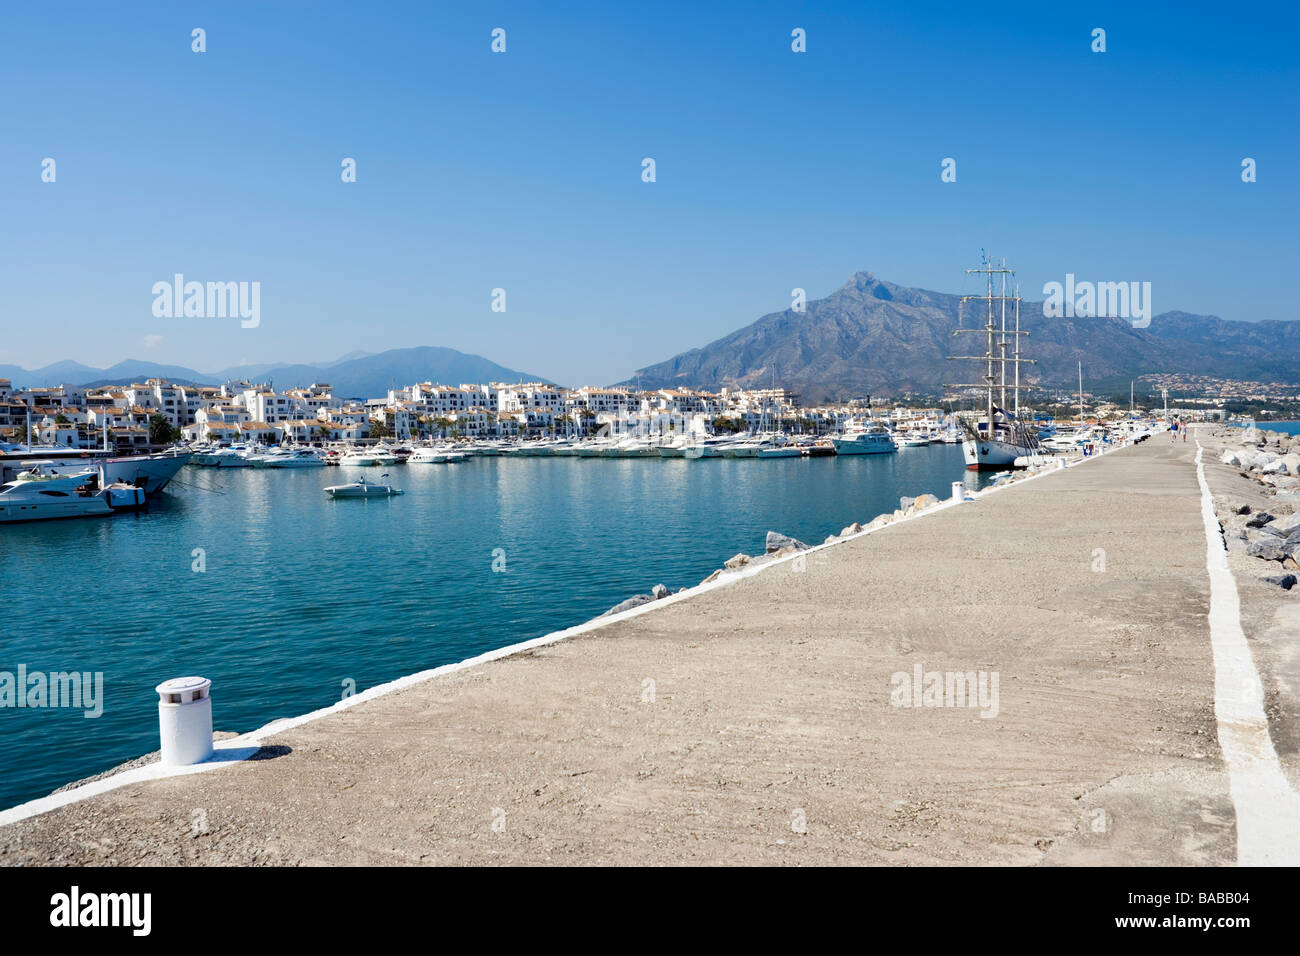 Puerto banus bar hi-res stock photography and images - Alamy